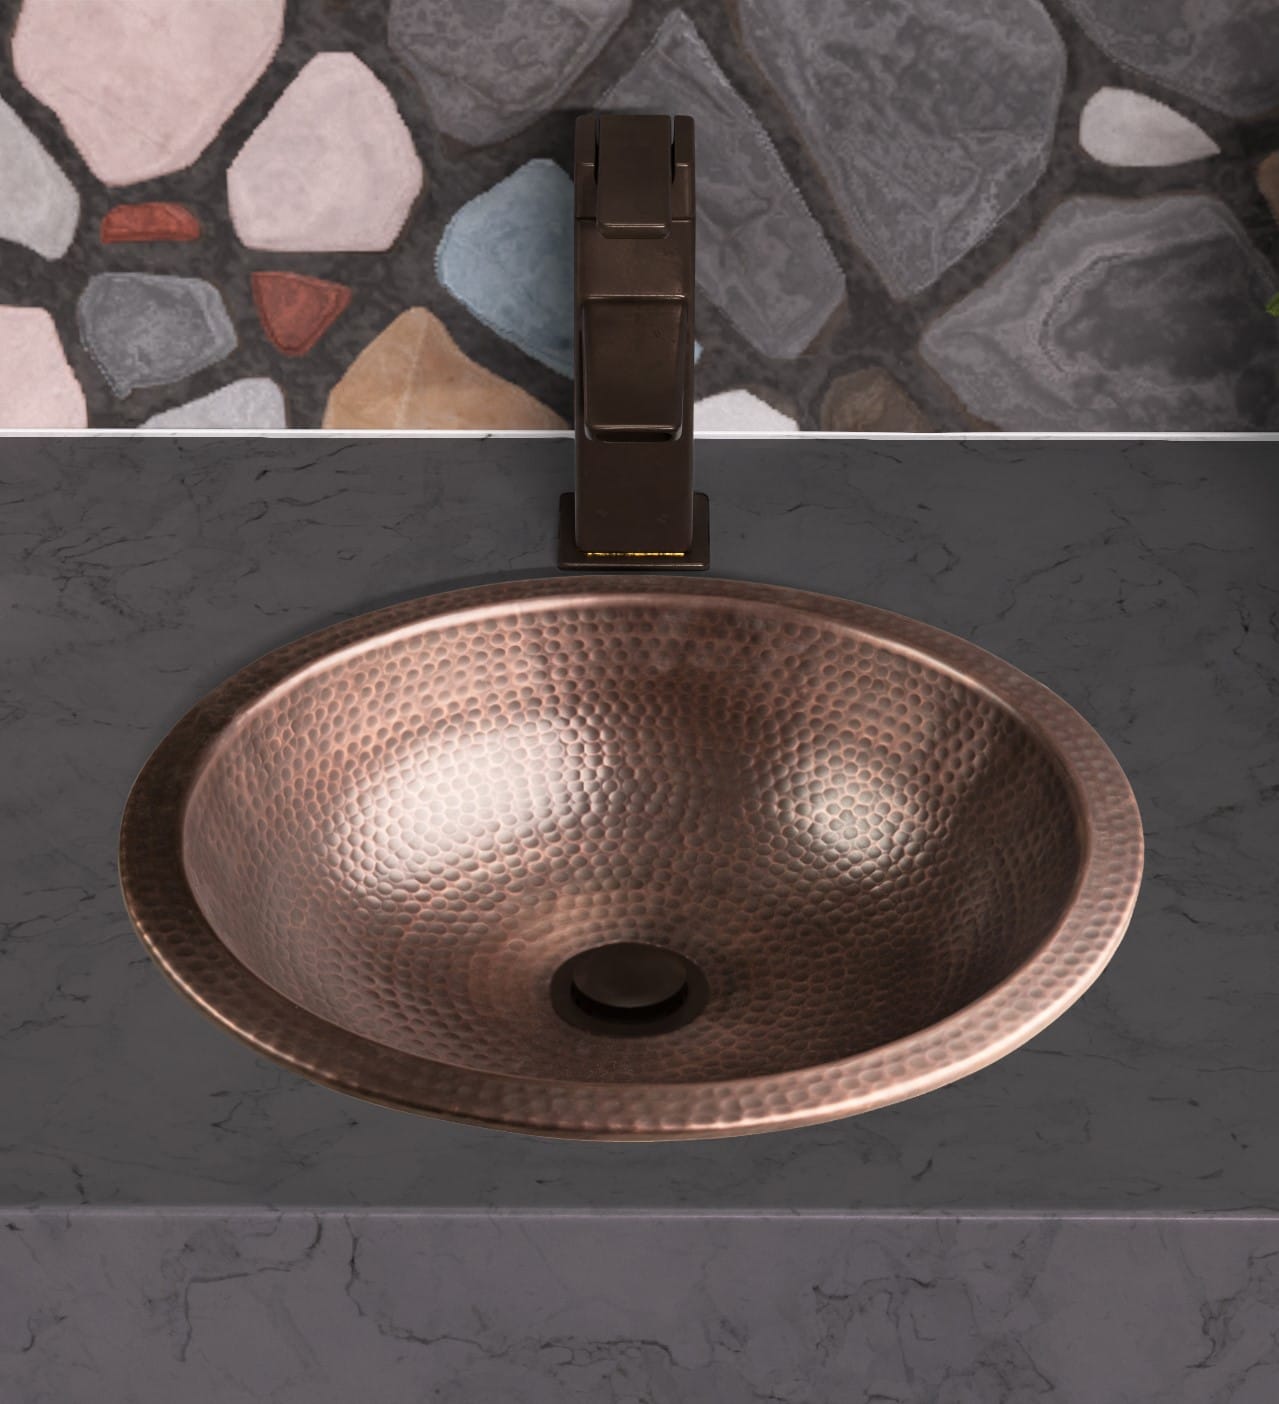 Monarch Abode Hand Hammered Copper Drop-In or Undermount Oval Rustic Bathroom Sink (16-in x 16-in)